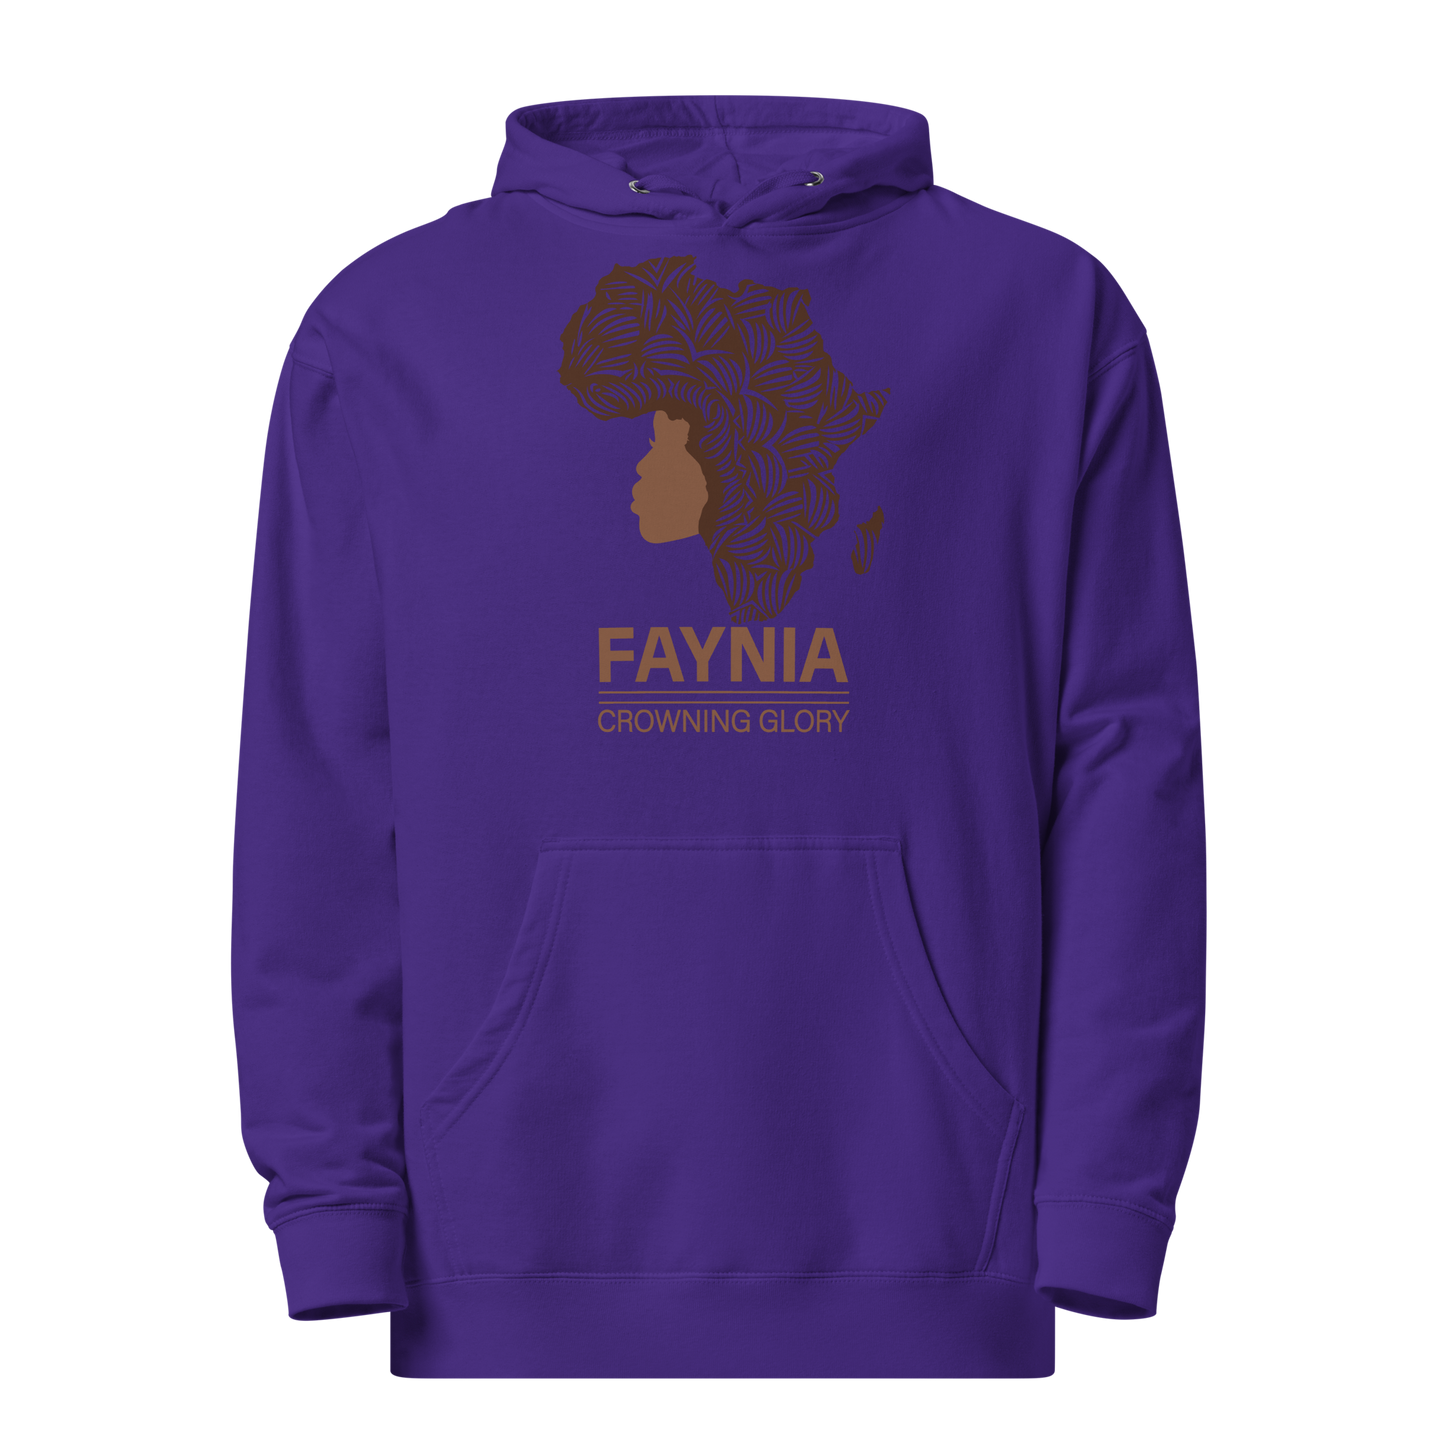 FAYNIA Midweight Hoodie